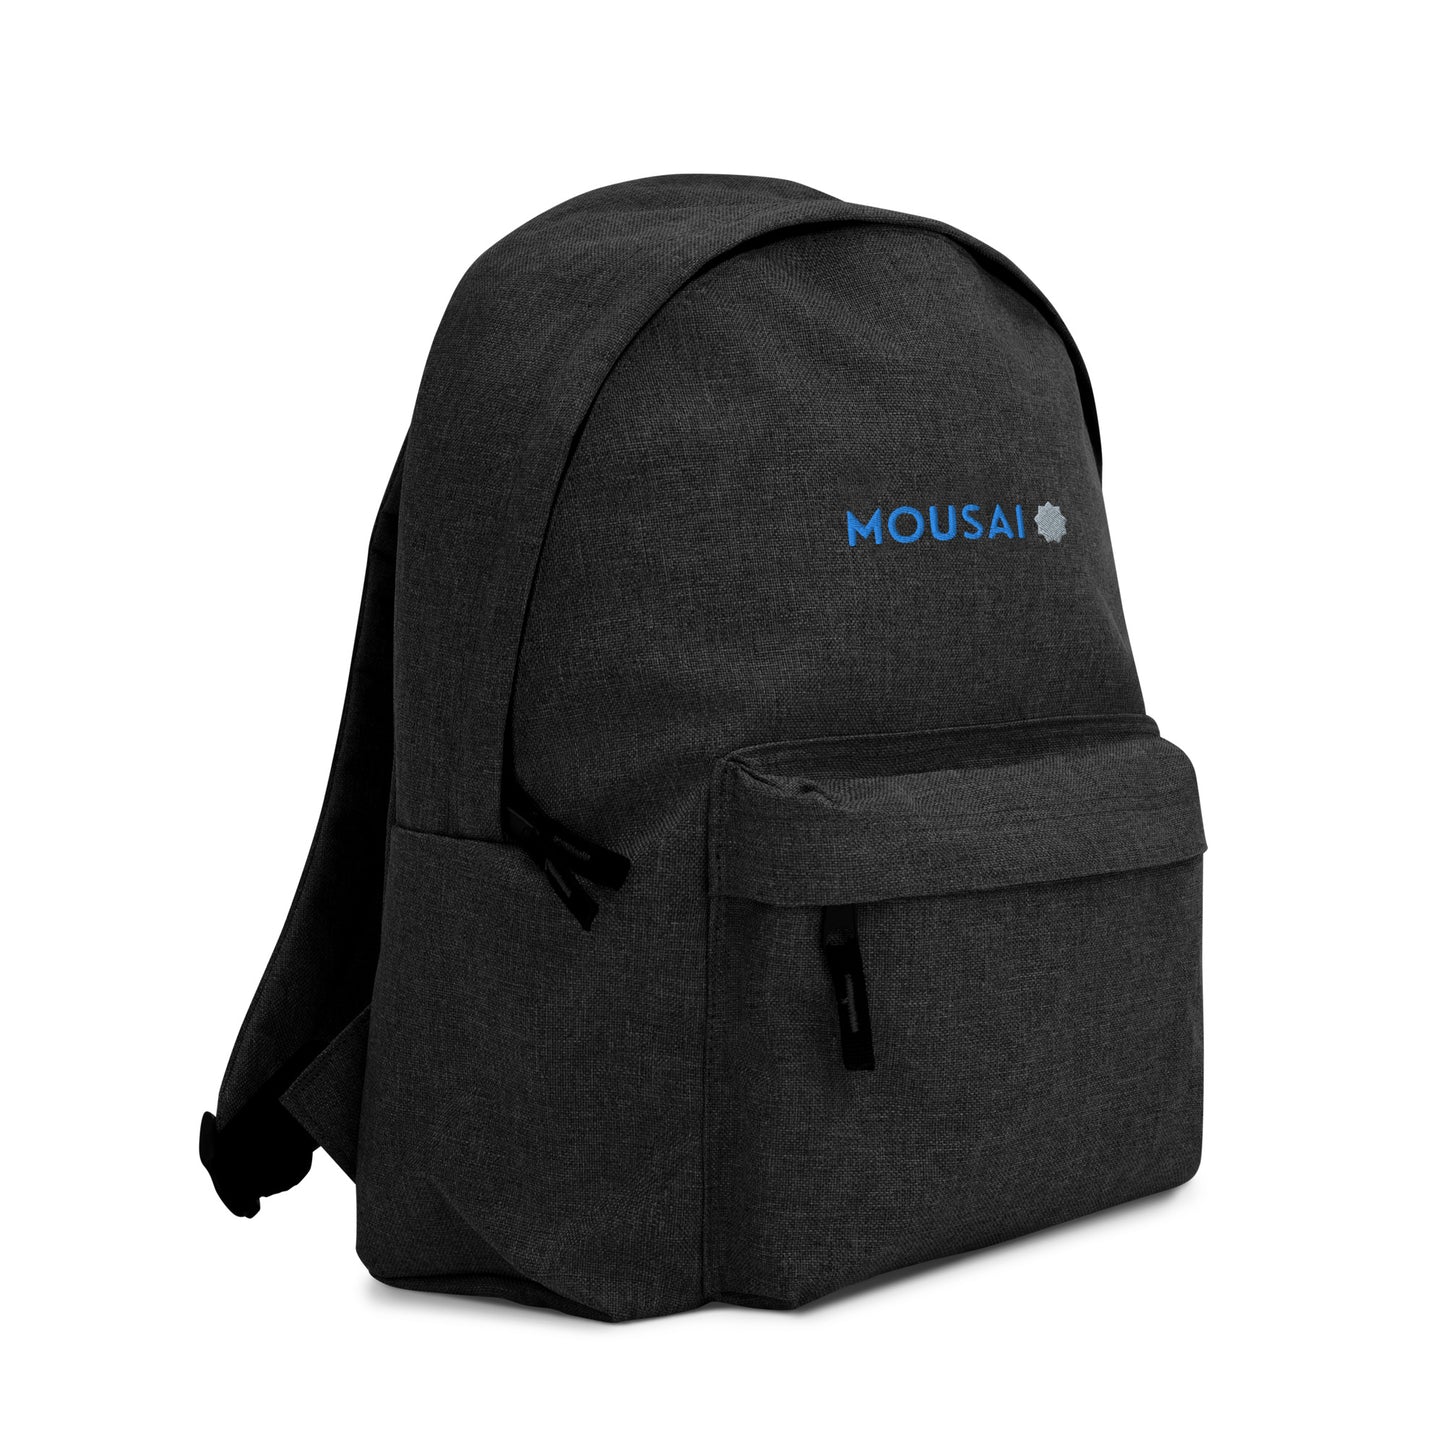 Mousai Backpack